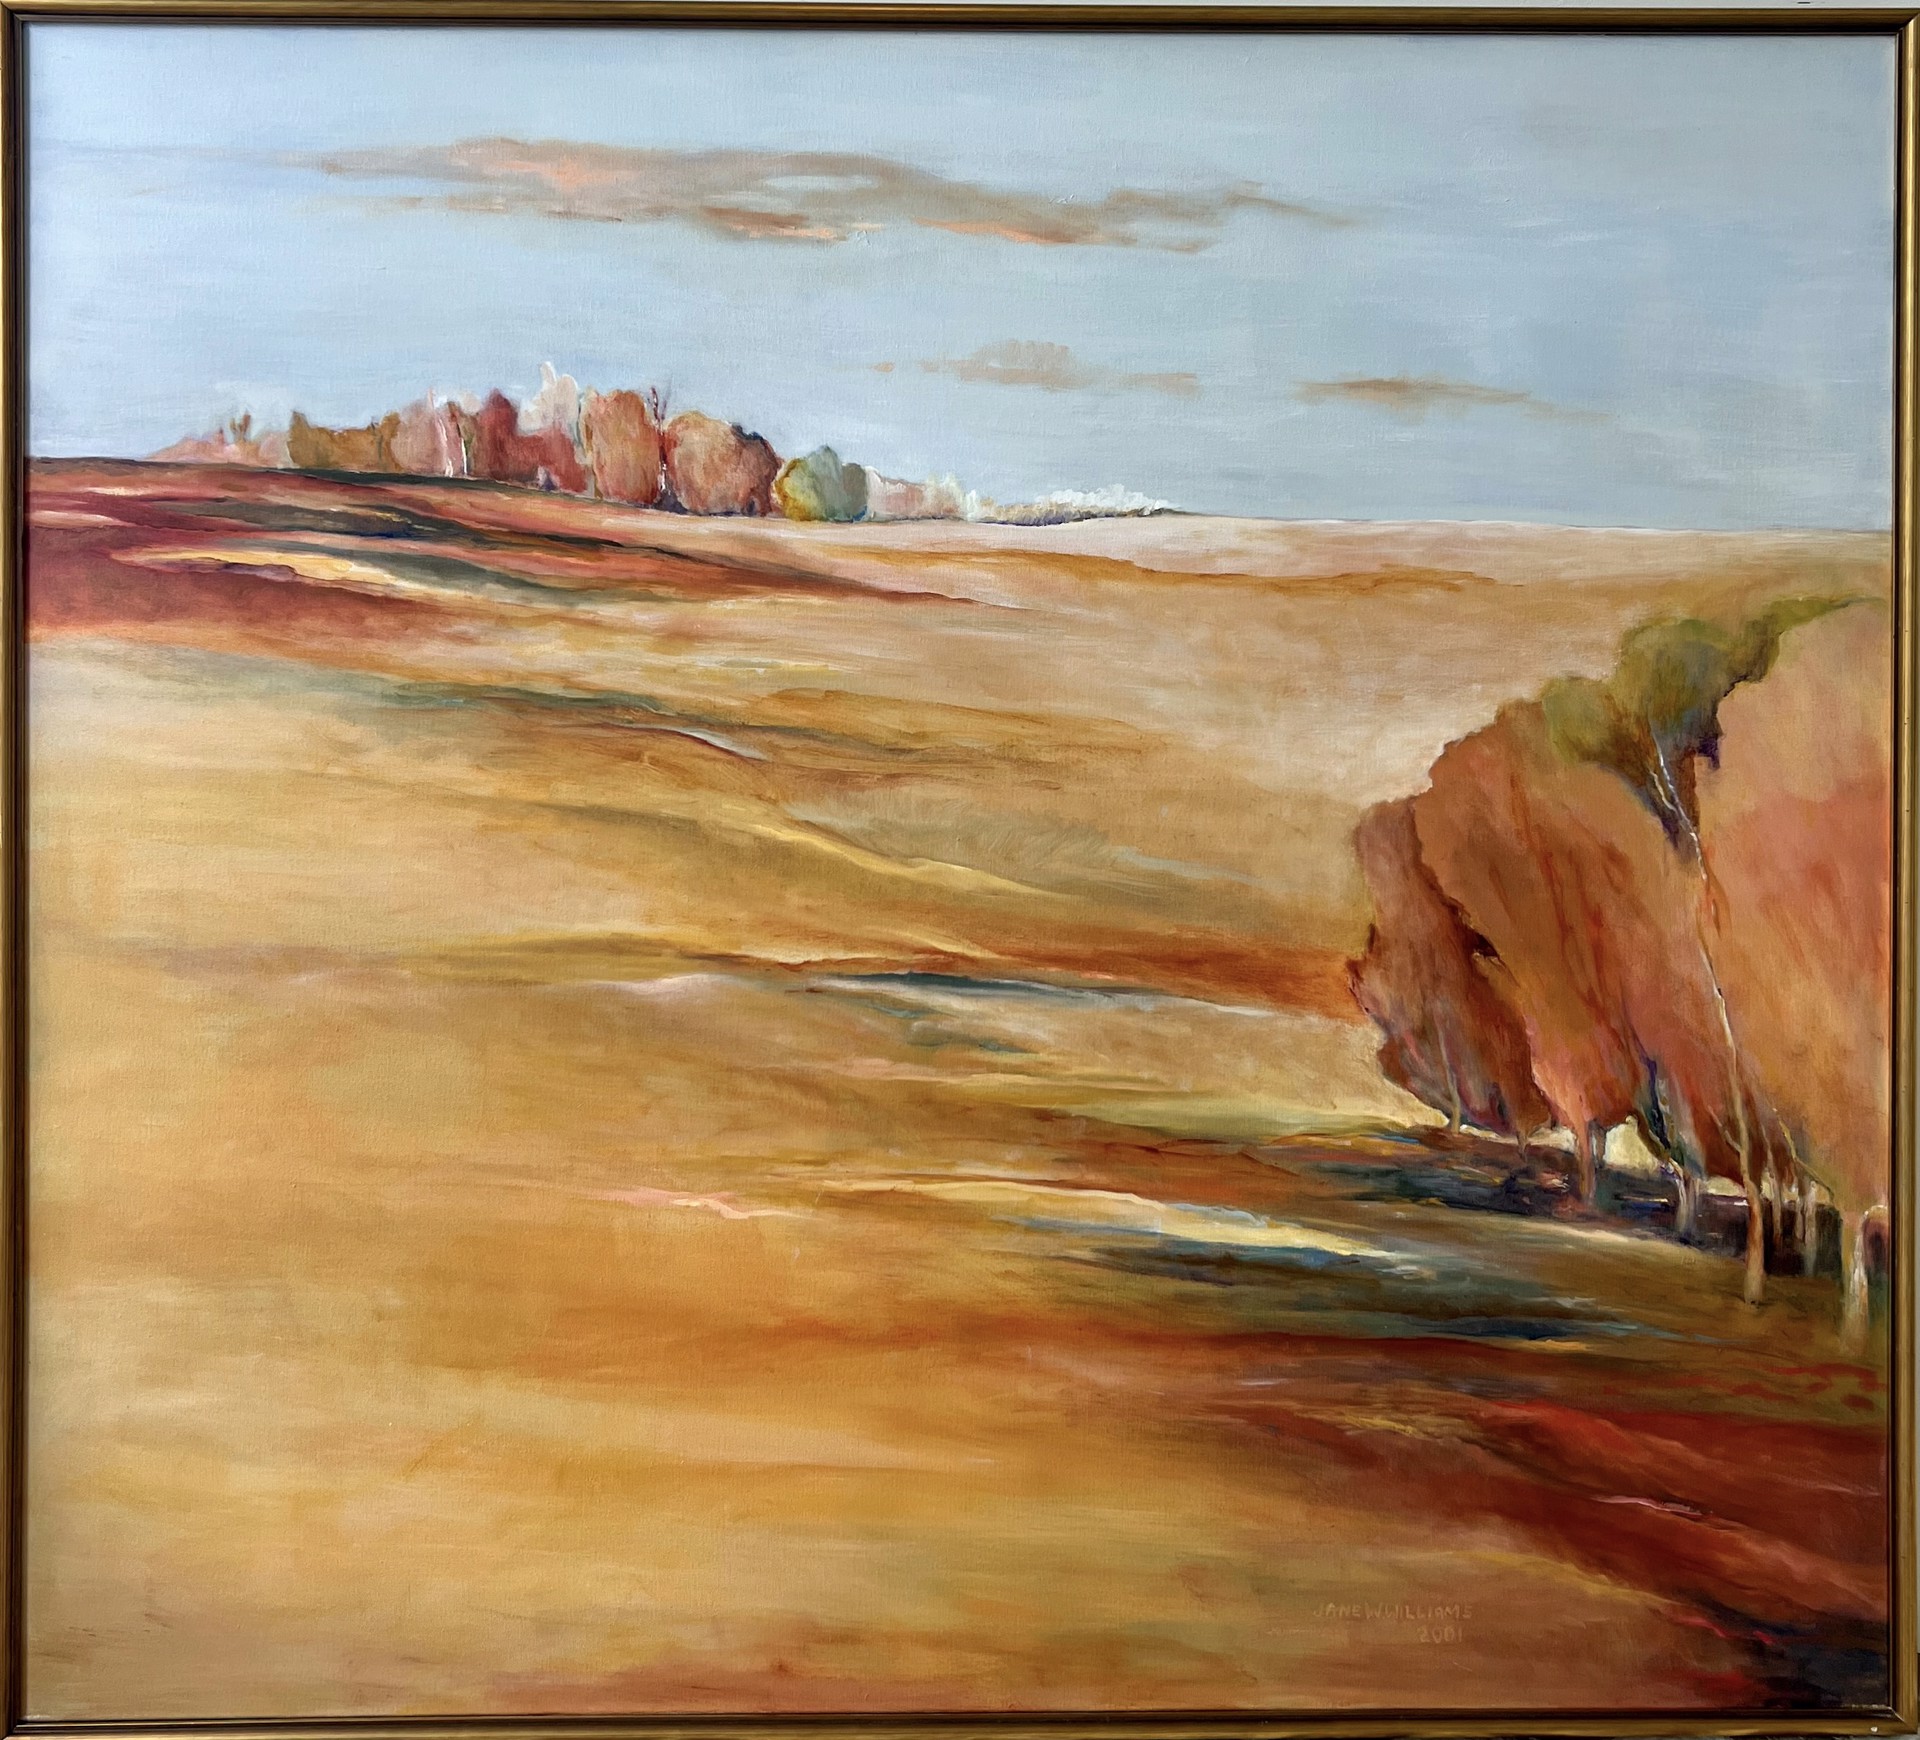 Landscape - Early Autumn by Jane W. Williams